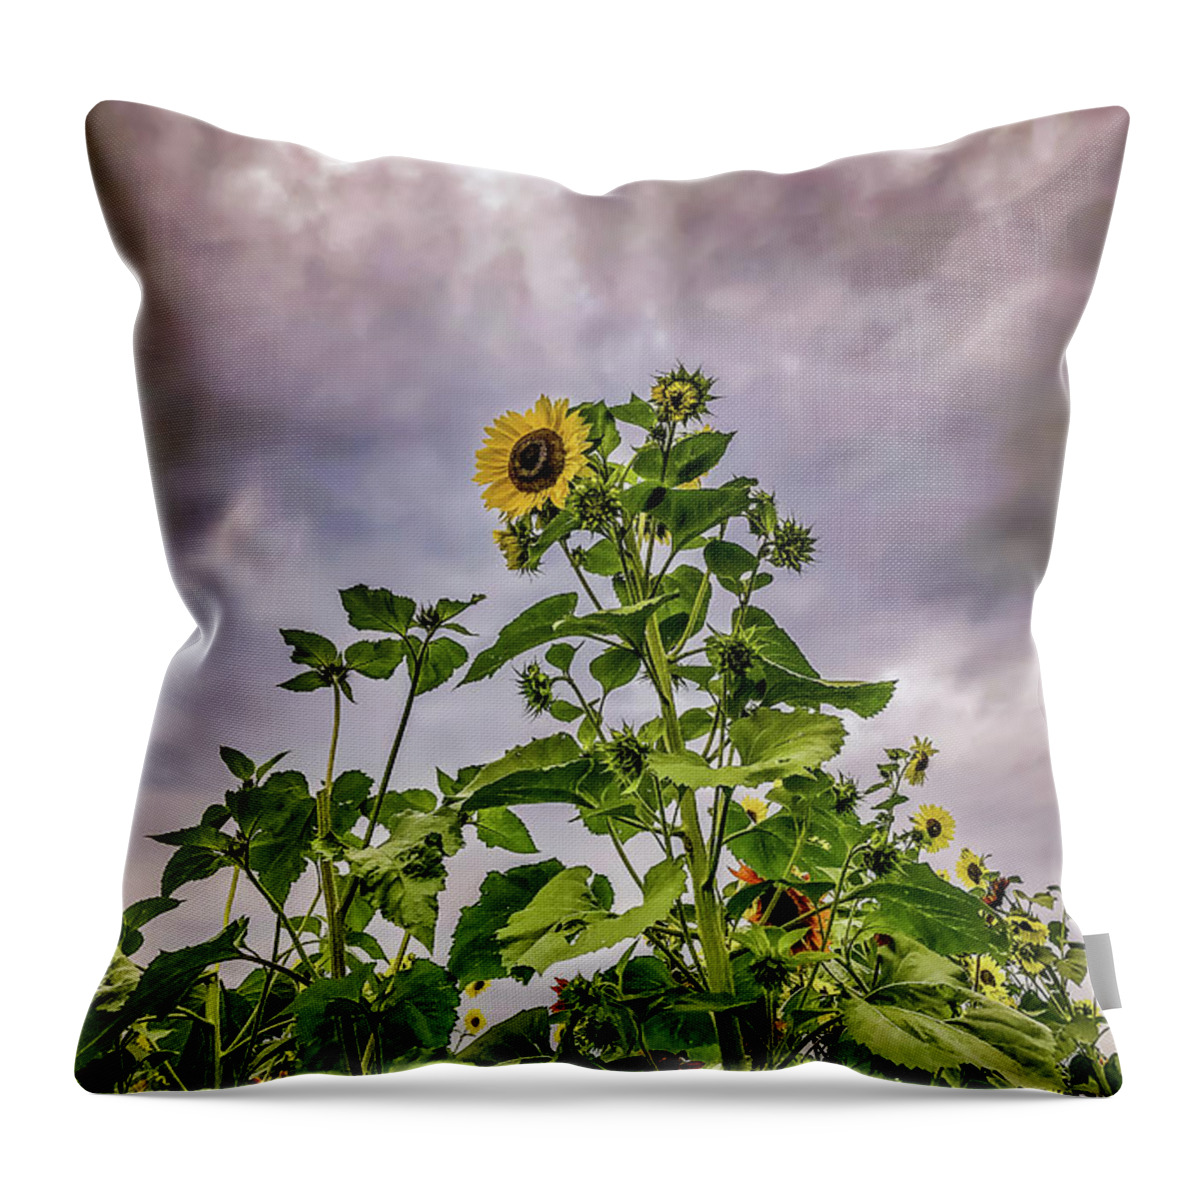 Sunflower Throw Pillow featuring the photograph Dramatic Sunflower by Anamar Pictures